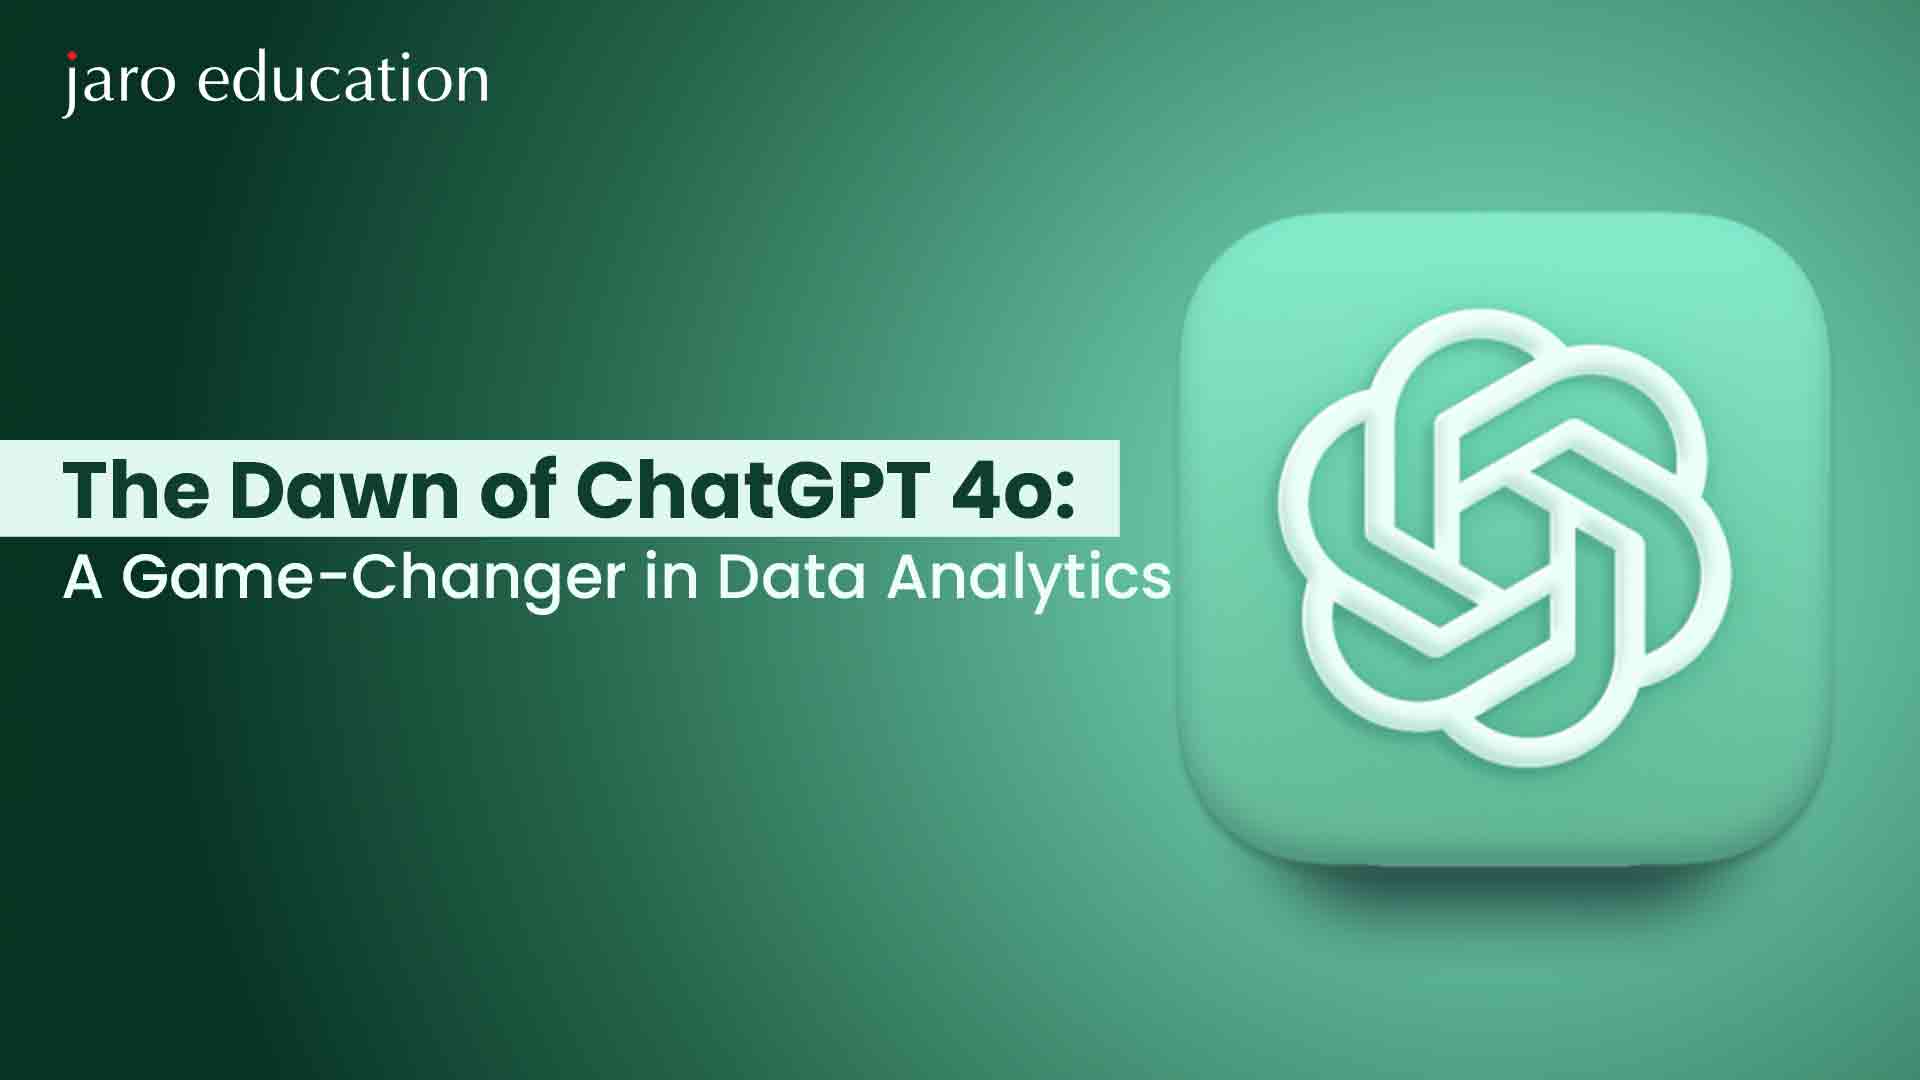 The-Dawn-of-ChatGPT-4o-A-Game-Changer-in-Data-Analytics